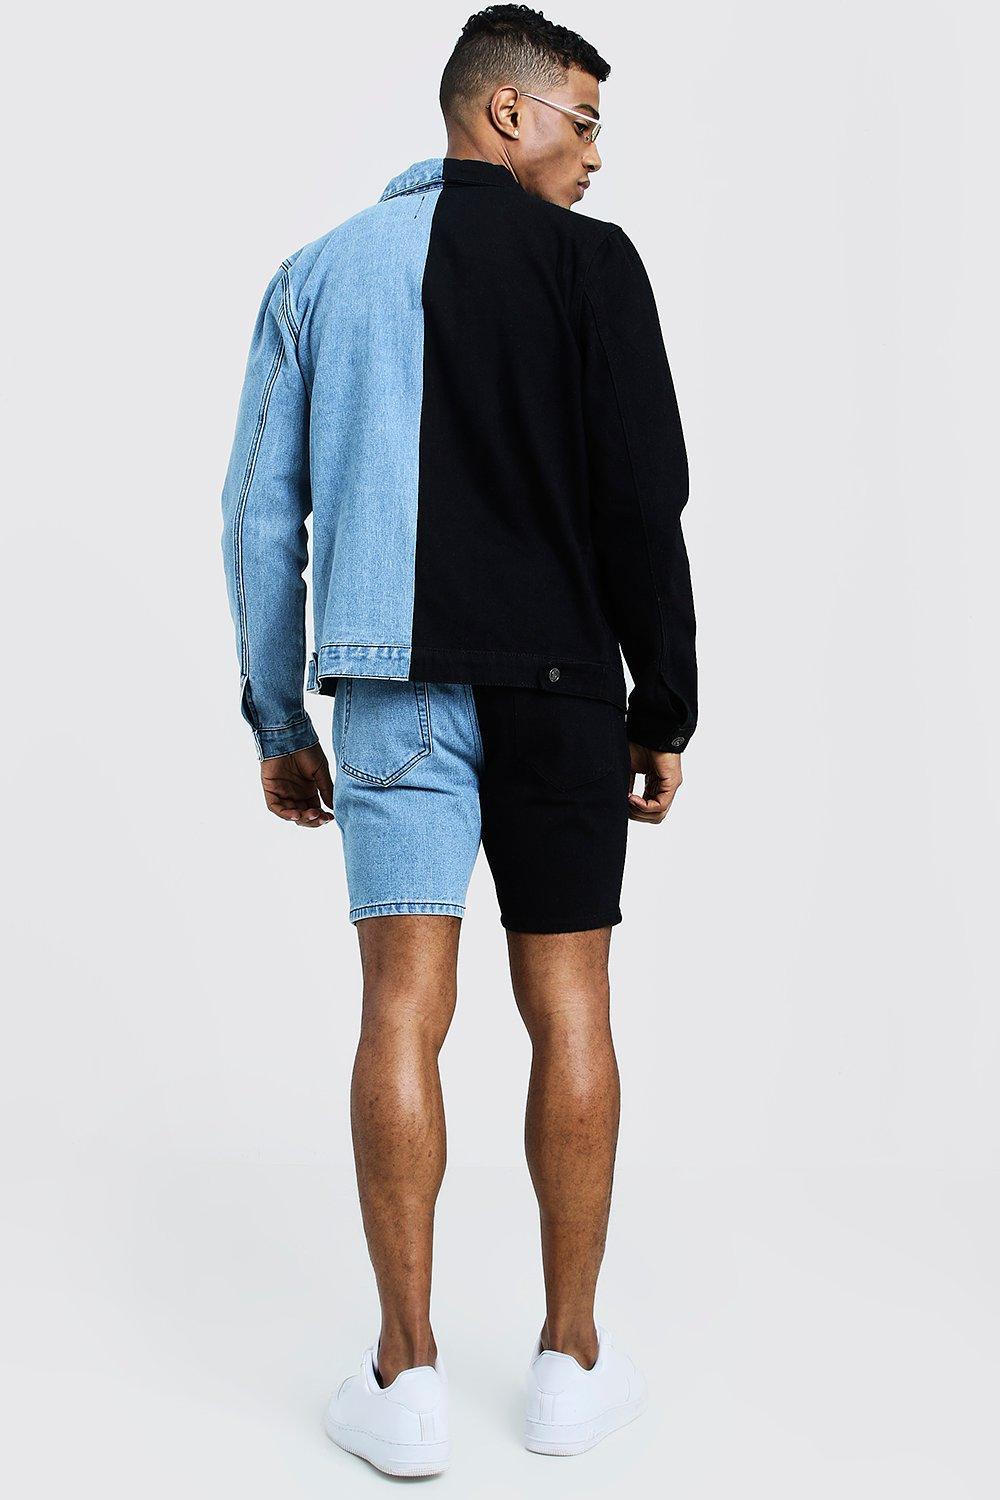 Boohoo Denim Jacket With Contrast Detail in Blue for Men - Lyst